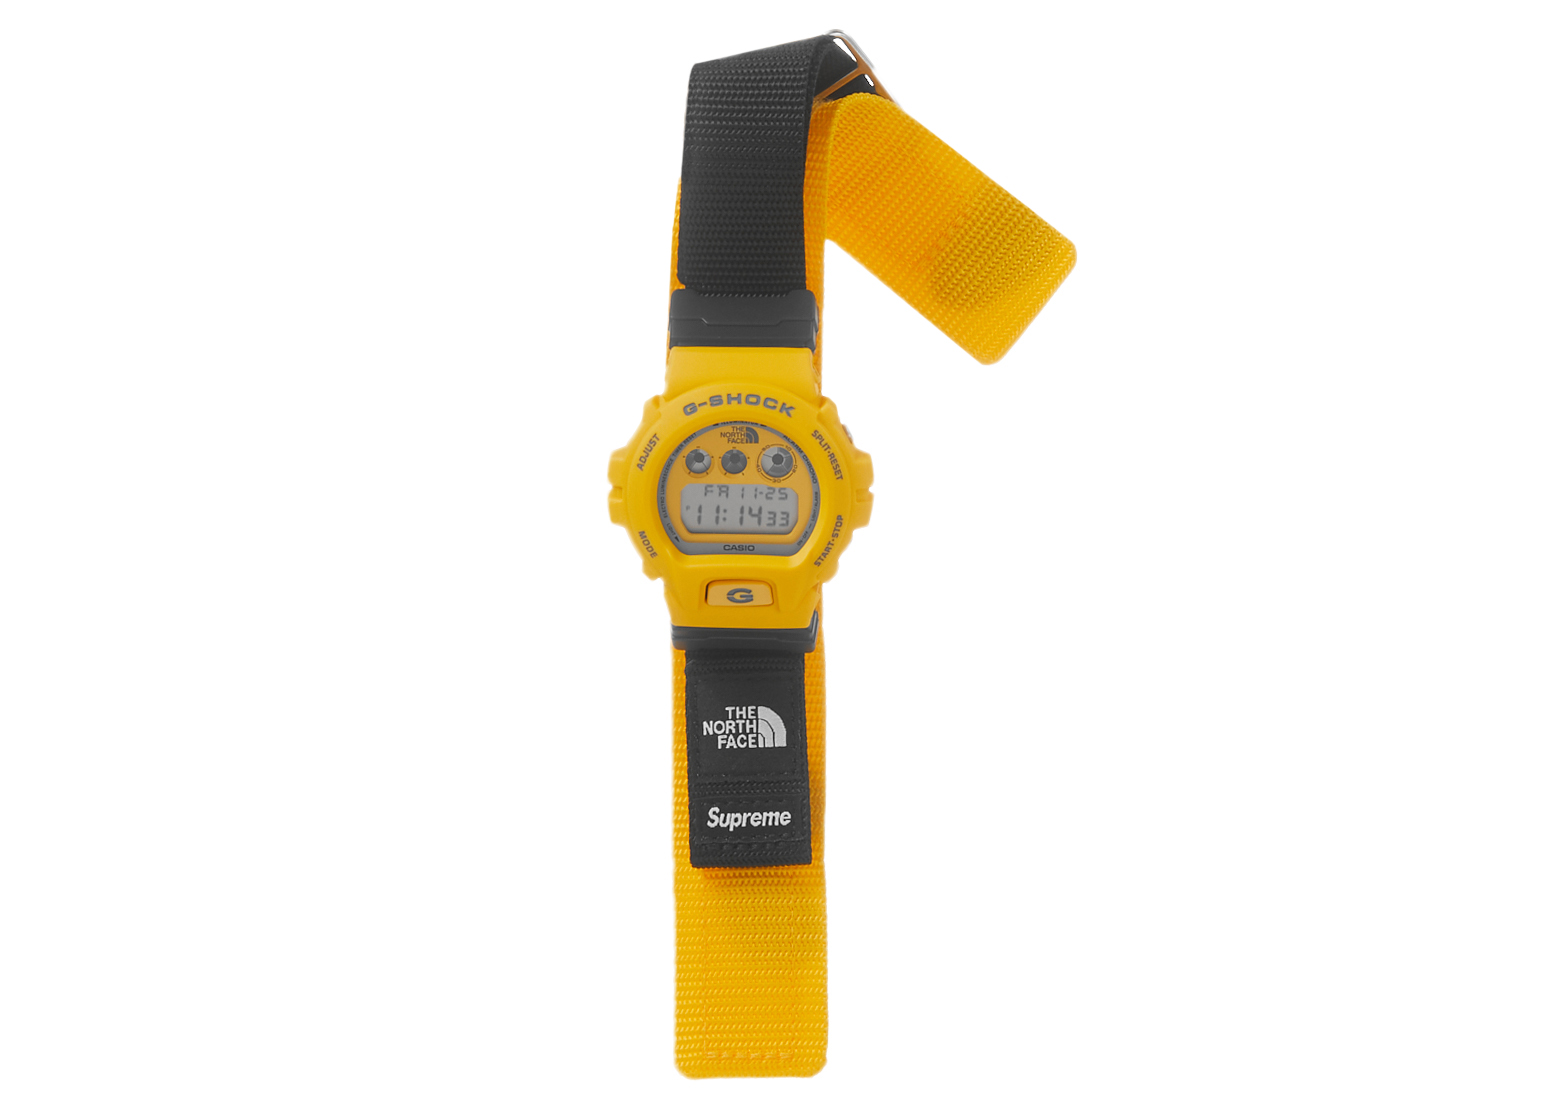 Supreme The North Face G-SHOCK Watch Yellow